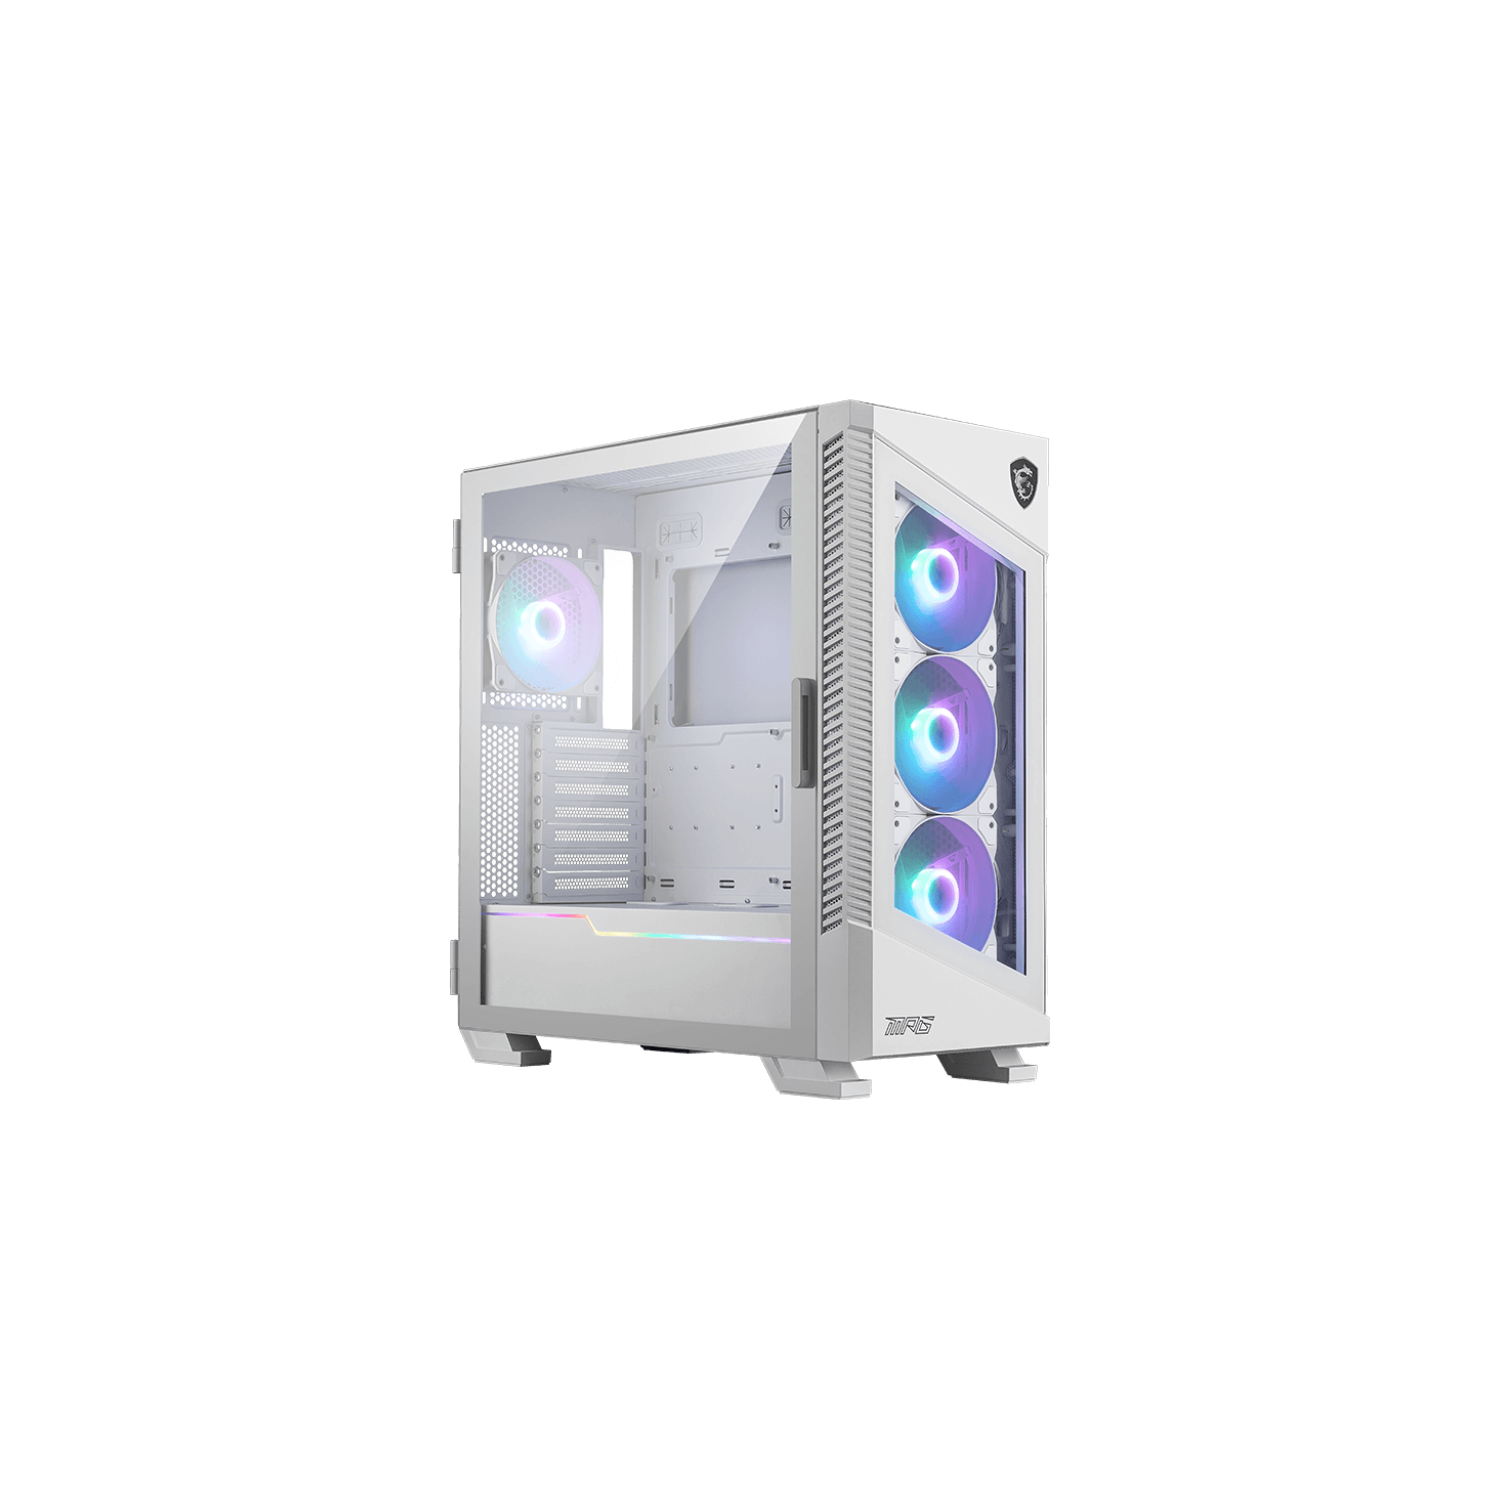 MSI MPG VELOX 100R WHITE - Mid-Tower Computer Case: Tempered Glass Side Panel, 120MM ARGB Fans, Liquid Cooling Support up to 360mm Radiator